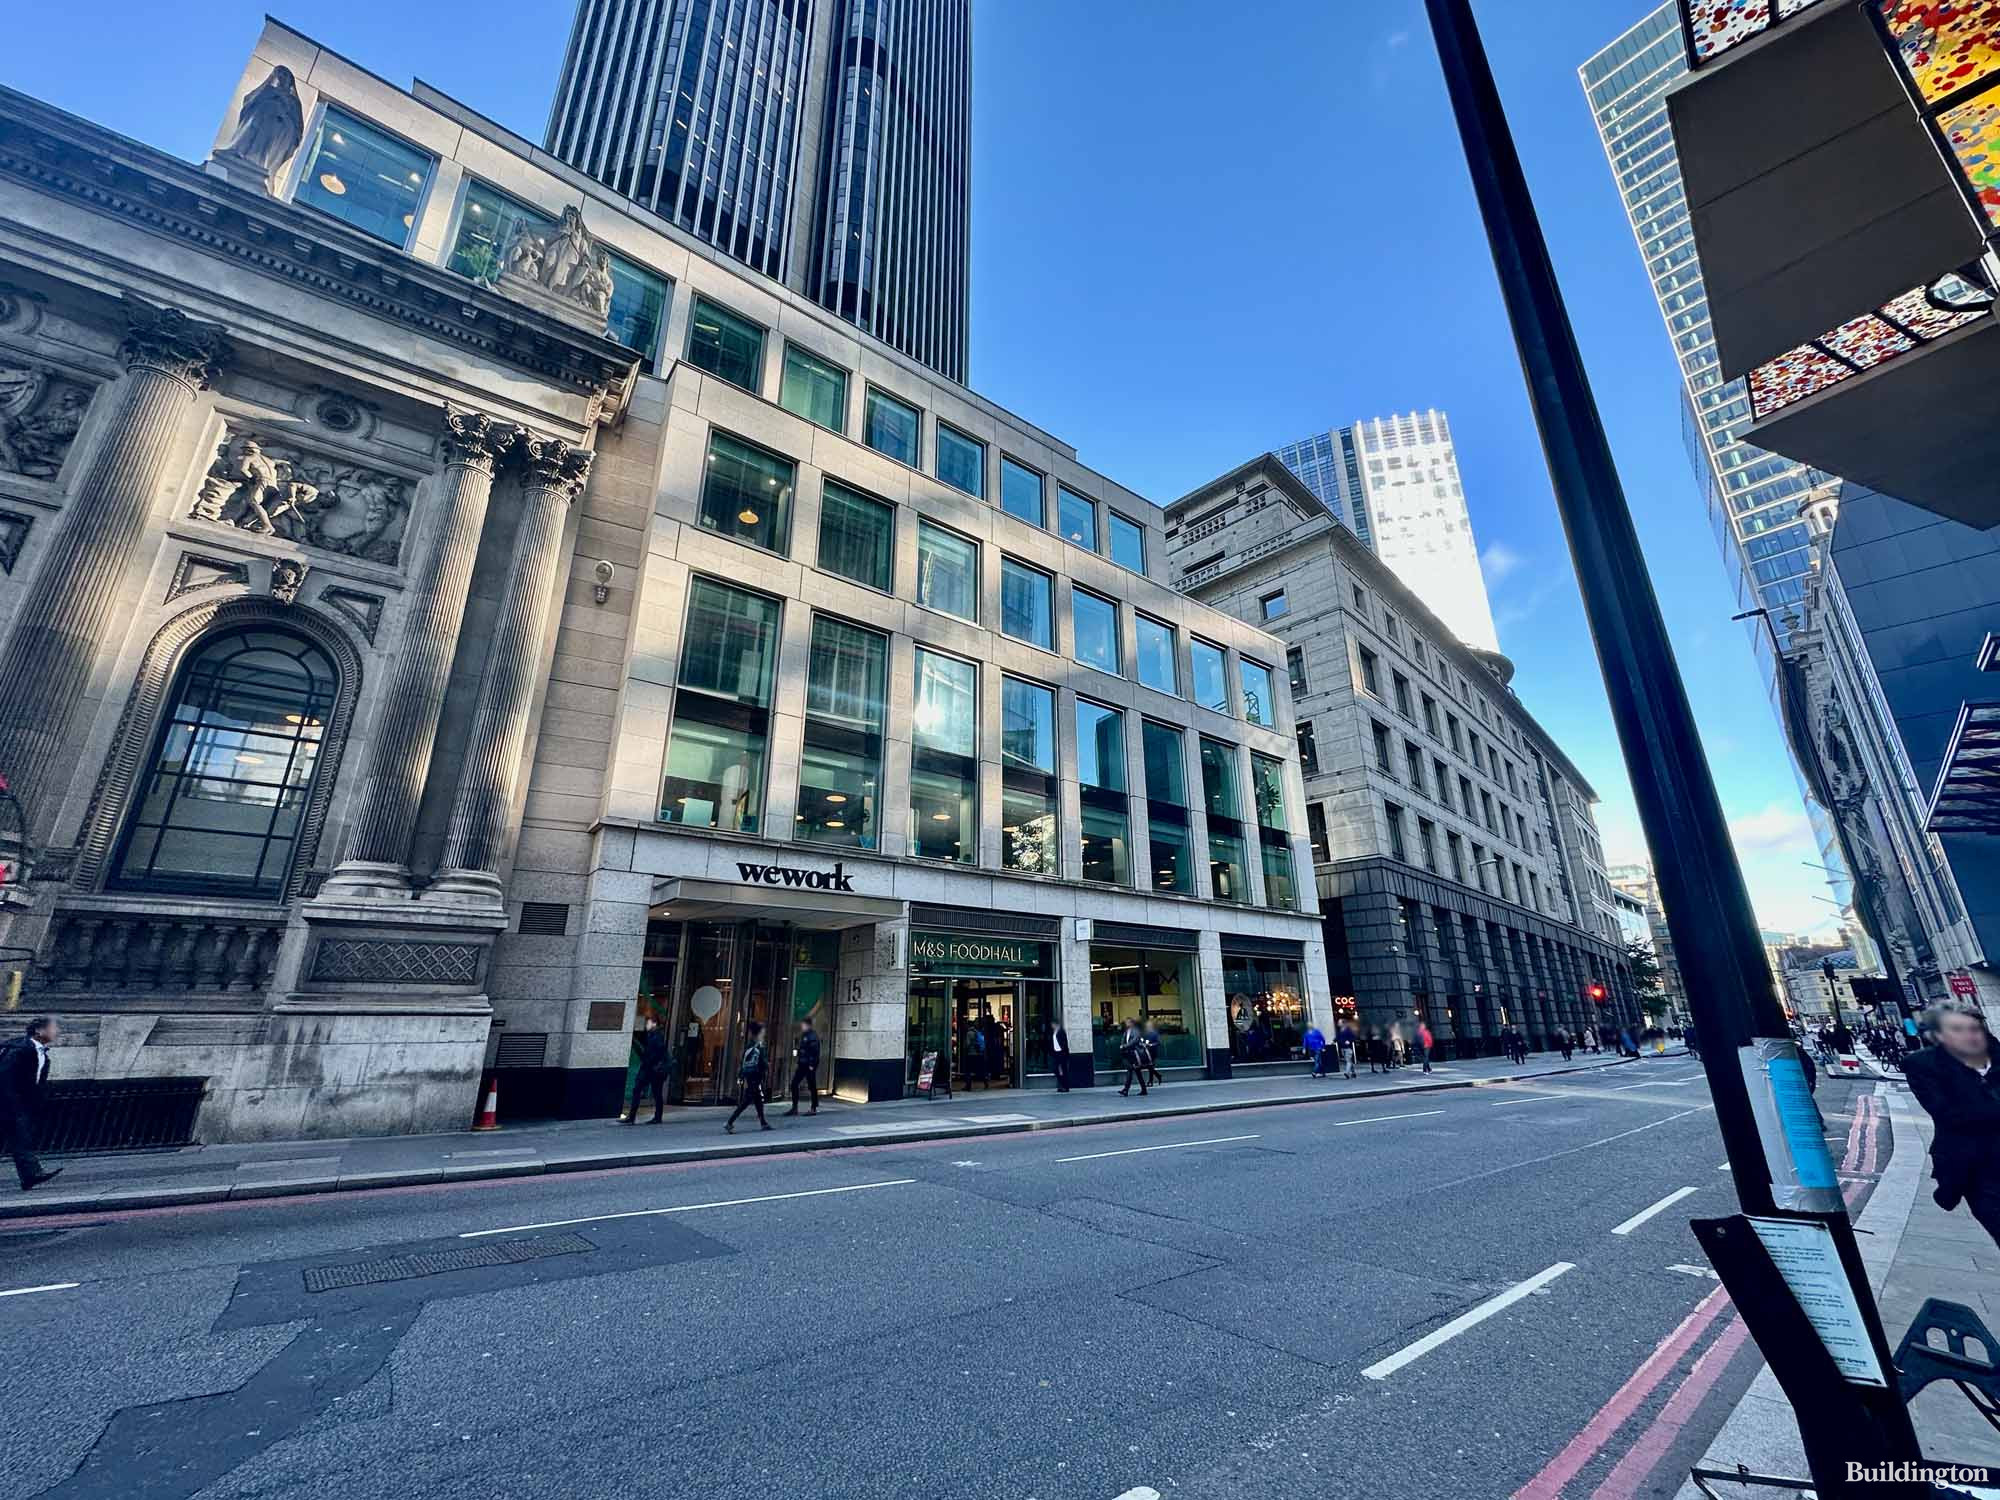 WeWork at 15 Bishopsgate office building in the City of London EC2.